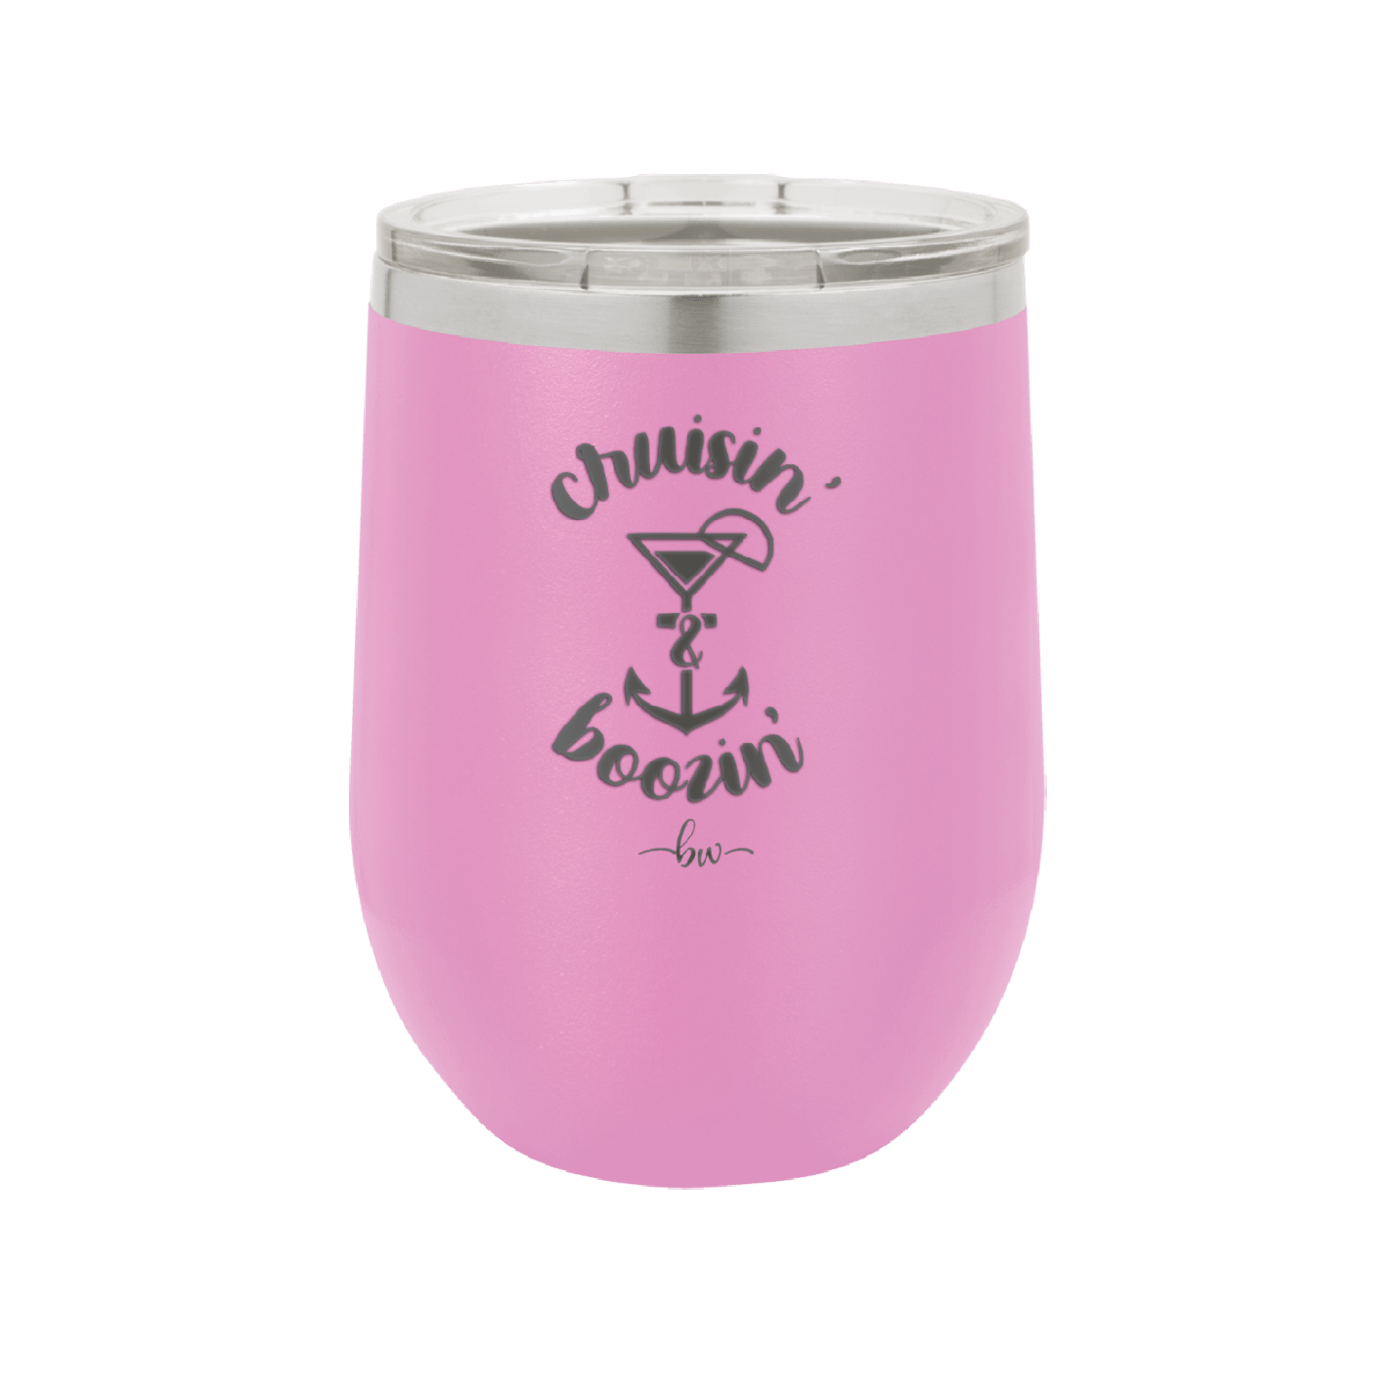 Cruisin and Boozin Cruise 2 - Laser Engraved Stainless Steel Drinkware - 1467 -